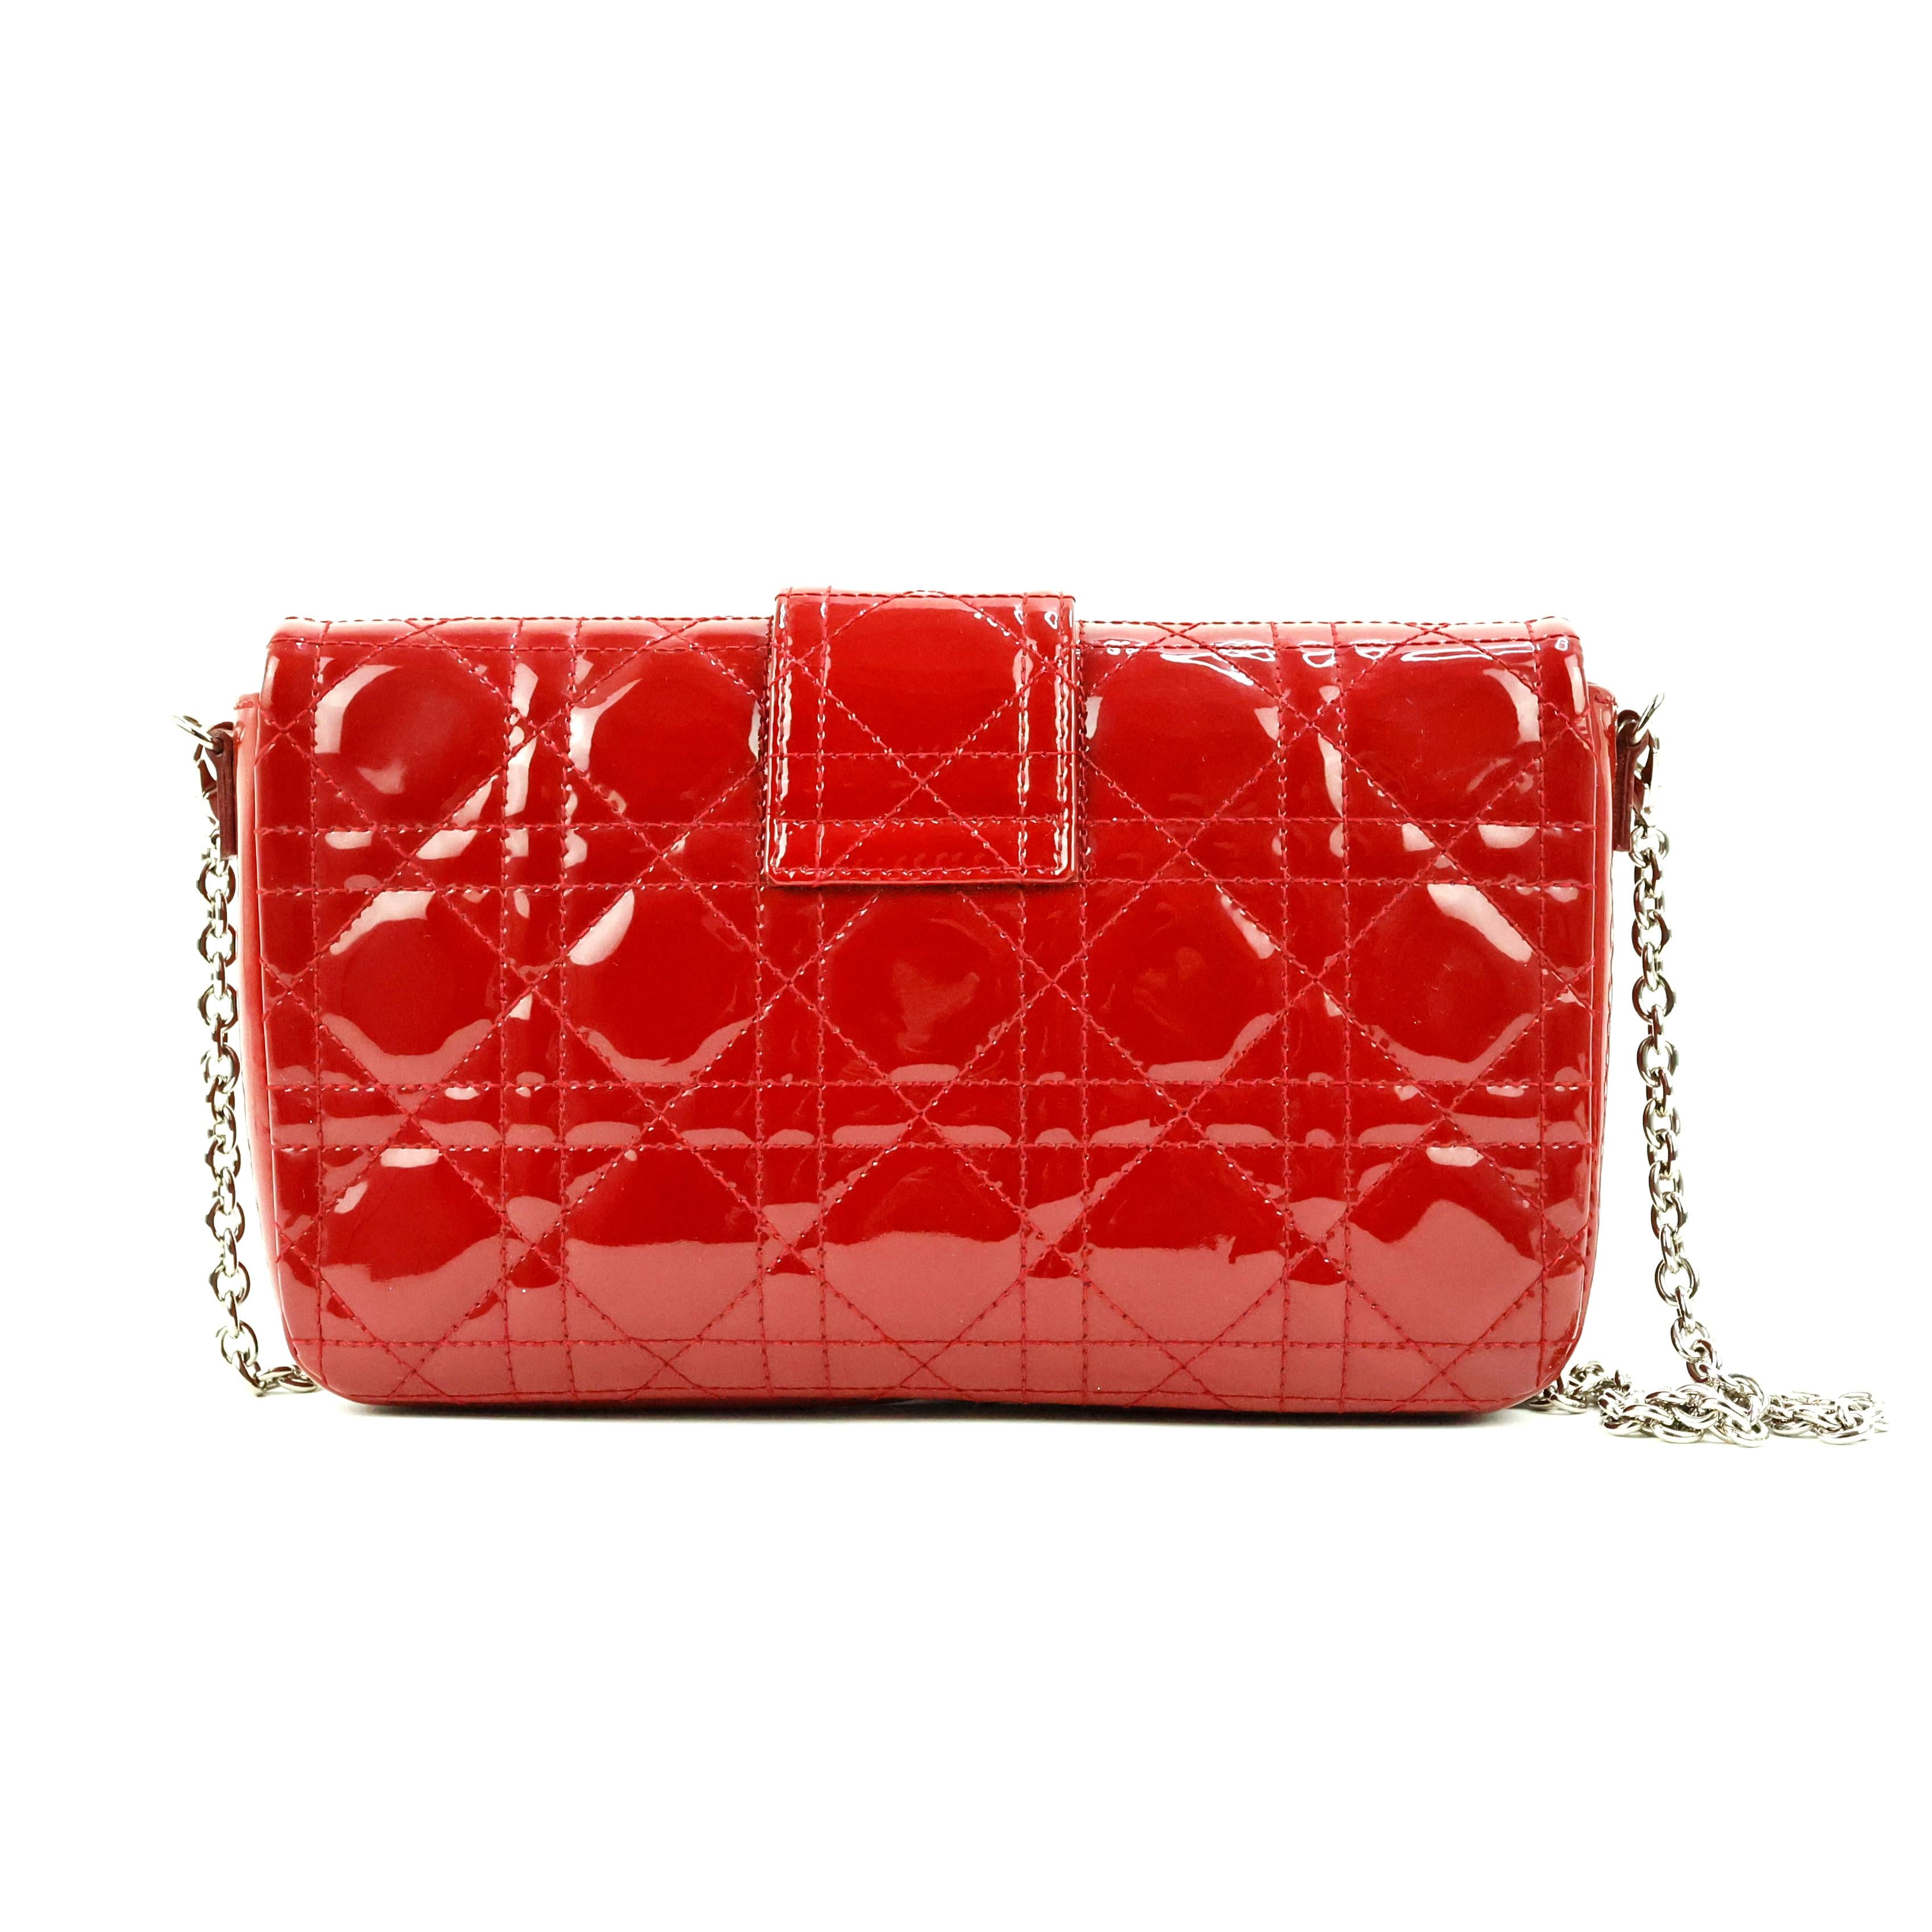 Dior Miss Dior crossbody chain bag, in leather color red, silver hardware.

Condition:
Really good.

Packing/accessories:
Dustbag.

Measurements:
21,5cm x 13cm x 4cm